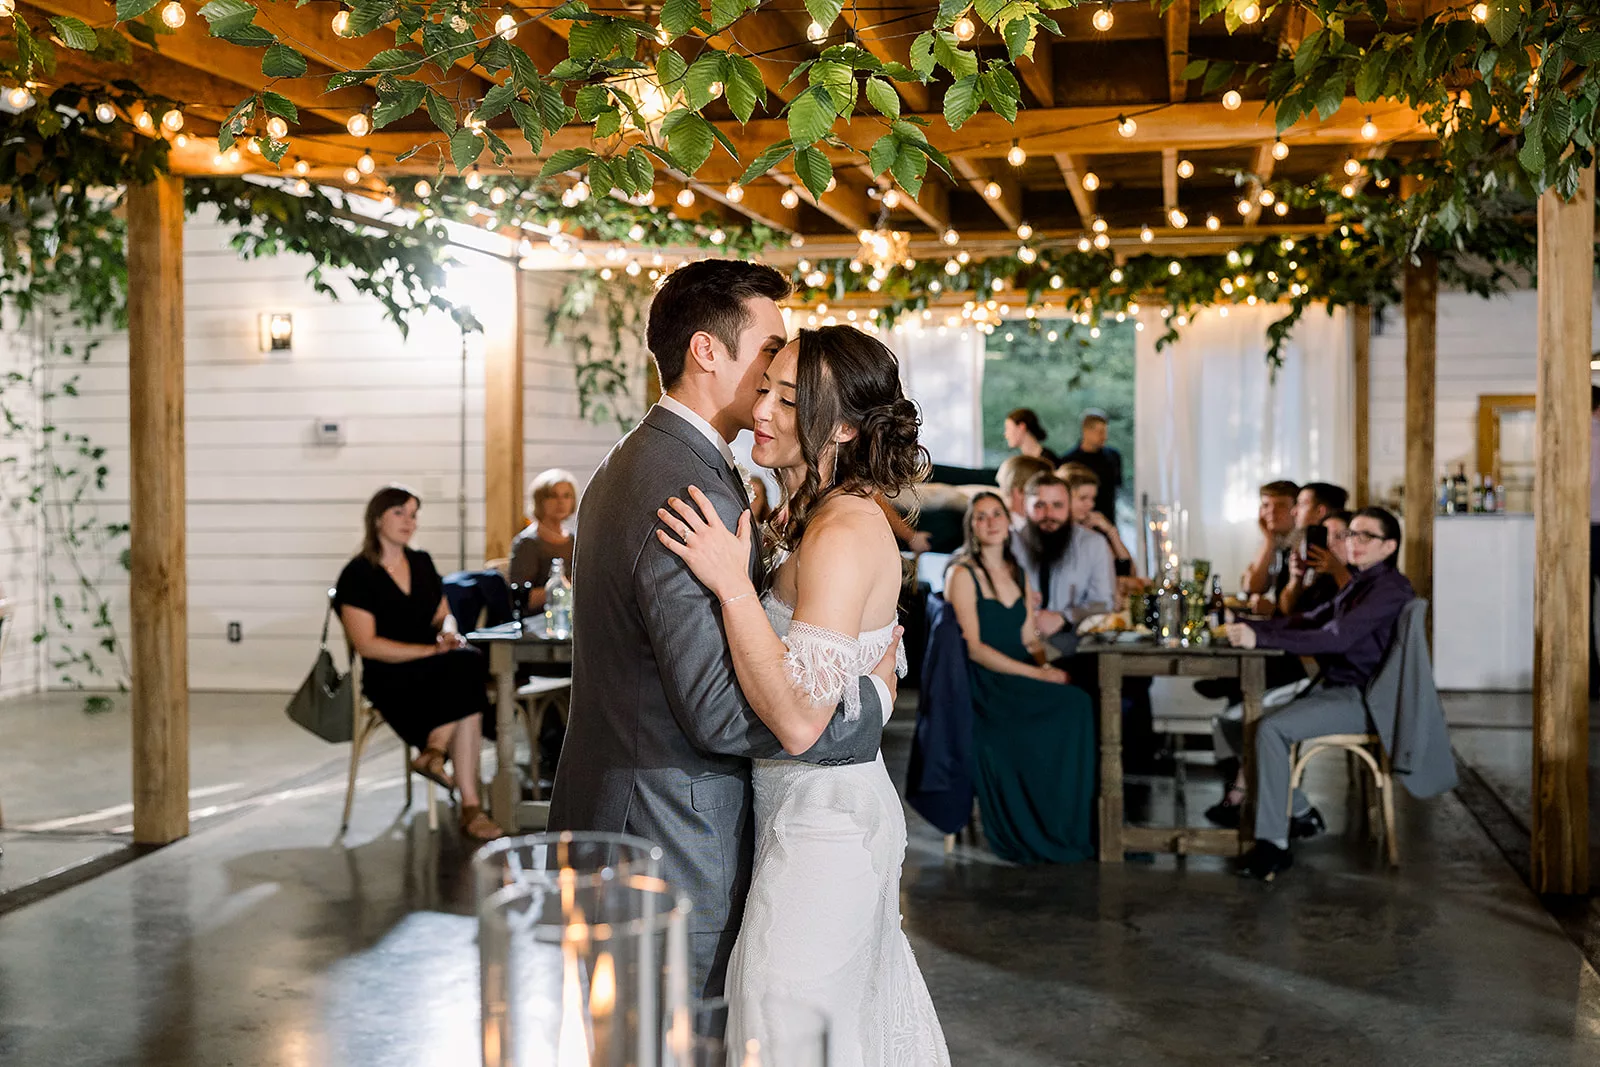 Newlyweds dance under a living rooftop in front of their guests at a Sustainable Wedding Venue